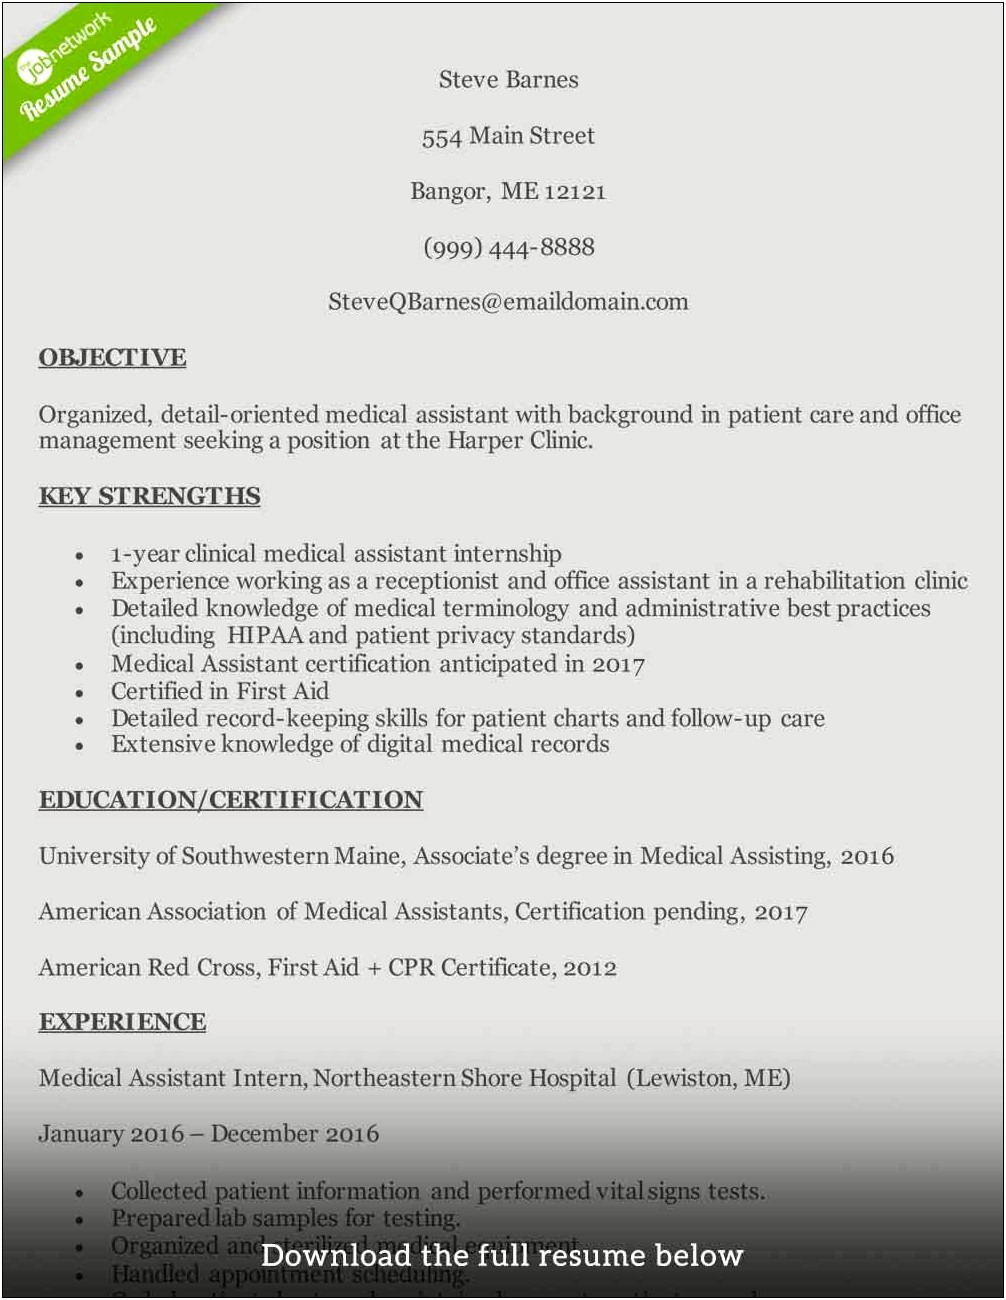 Resume Examples For A Medical Assistant